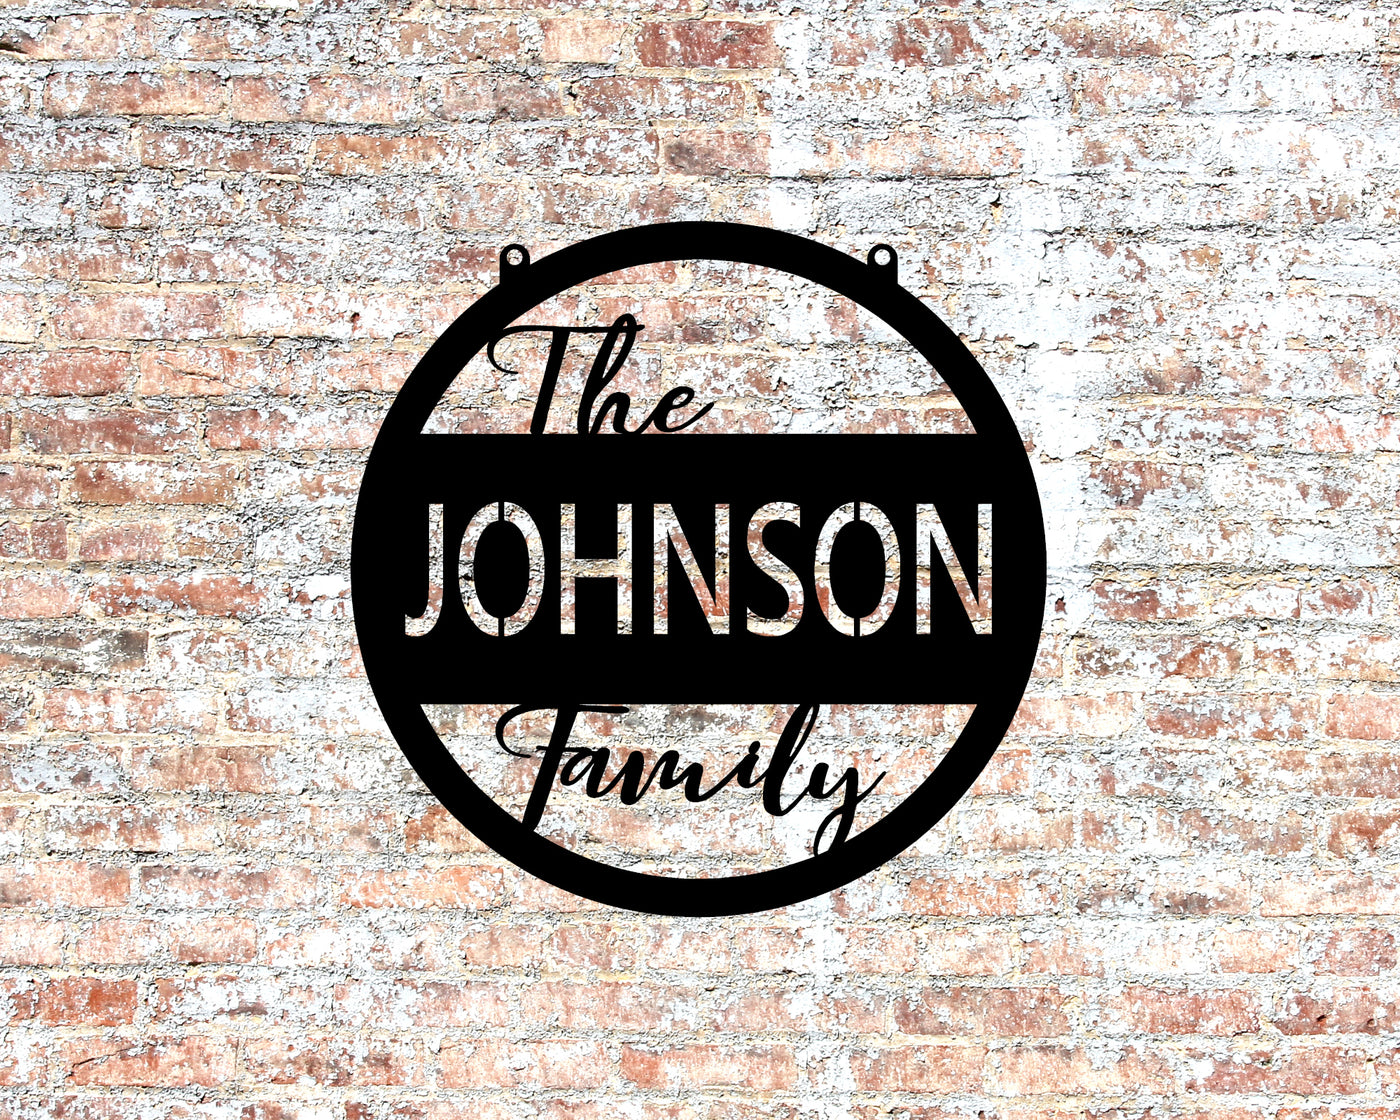 Personalized The Family, Round Metal Sign with Name - Madison Iron and Wood - Personalized sign - metal outdoor decor - Steel deocrations - american made products - veteran owned business products - fencing decorations - fencing supplies - custom wall decorations - personalized wall signs - steel - decorative post caps - steel post caps - metal post caps - brackets - structural brackets - home improvement - easter - easter decorations - easter gift - easter yard decor